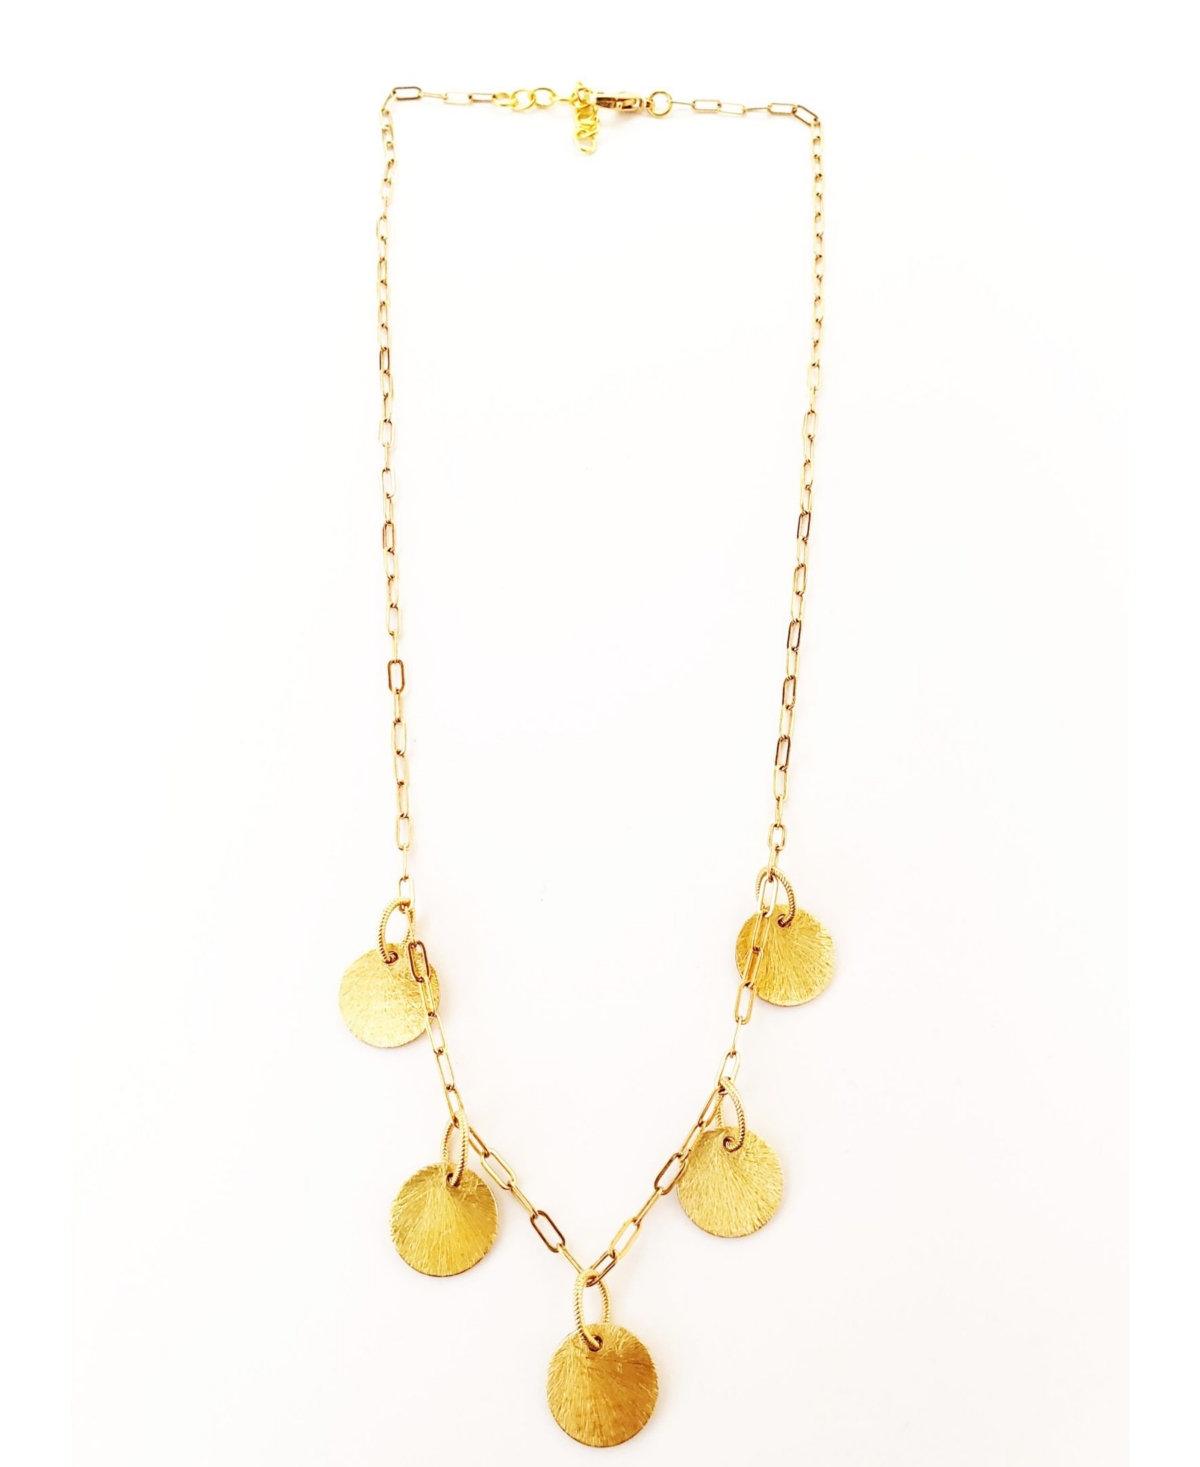 Women's Cayla Necklace - Gold - Tone